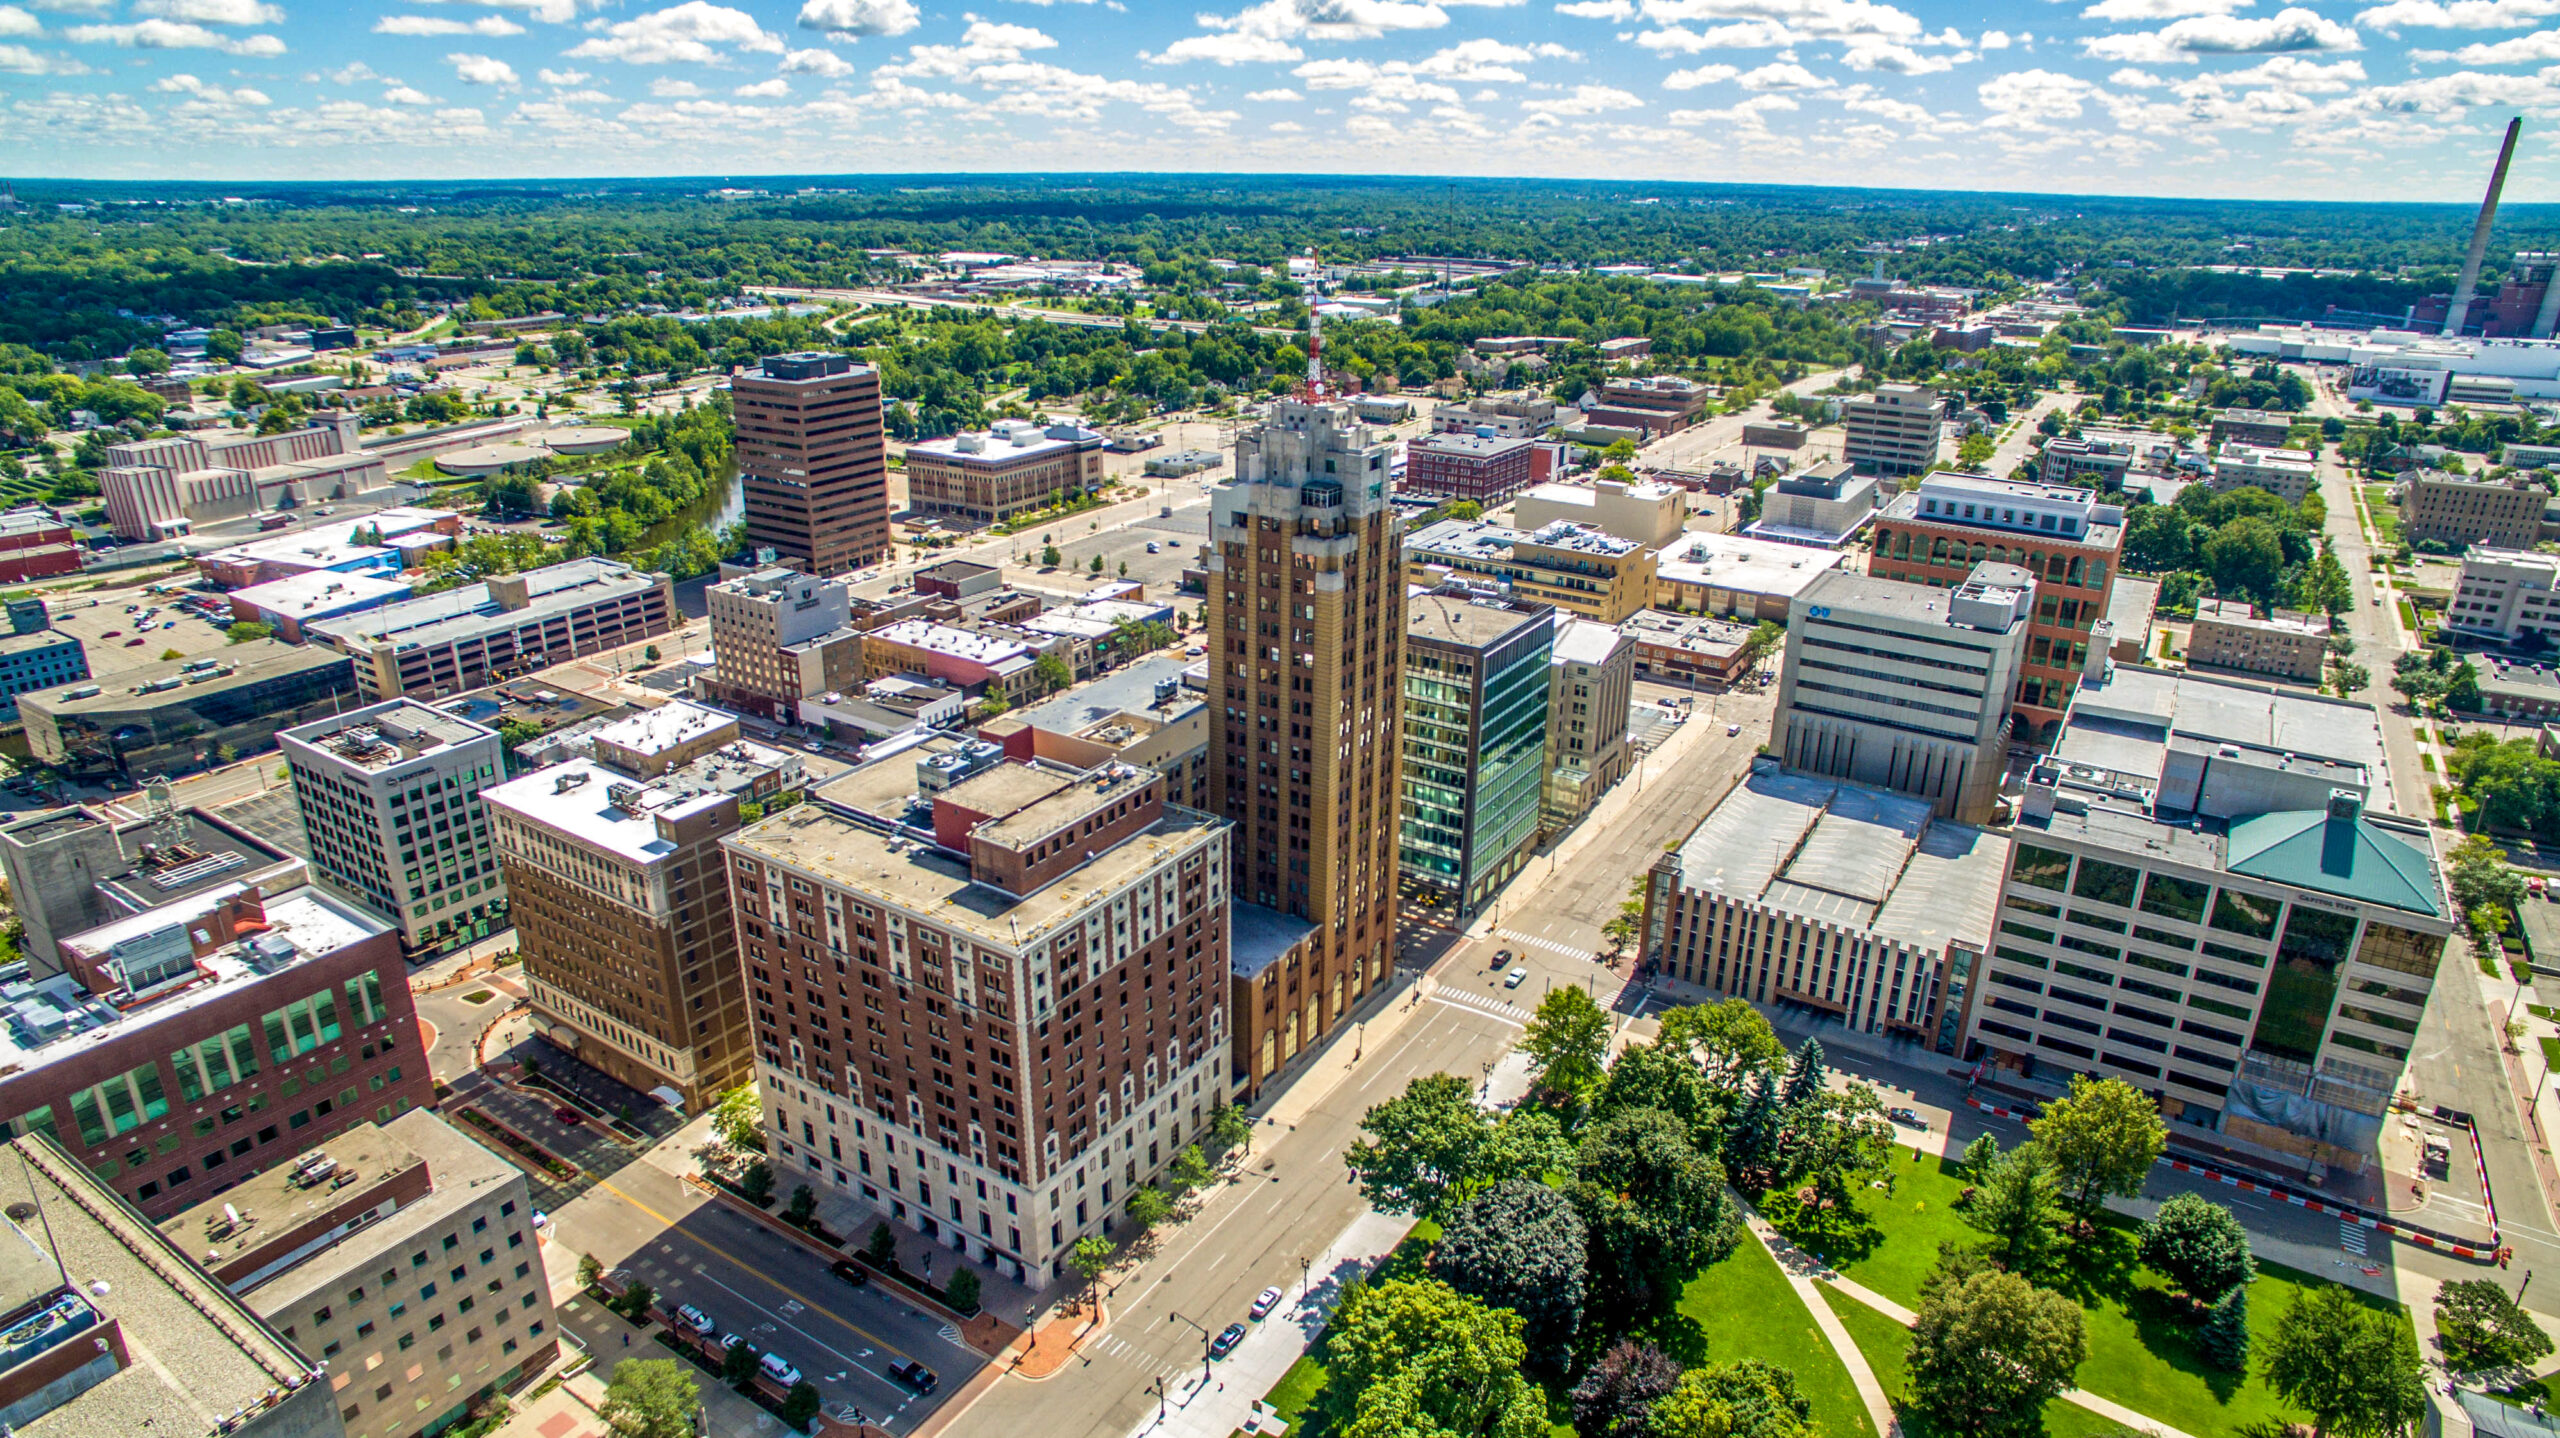 Aerial view of city against cloudy sky, Lansing, Michigan, USA